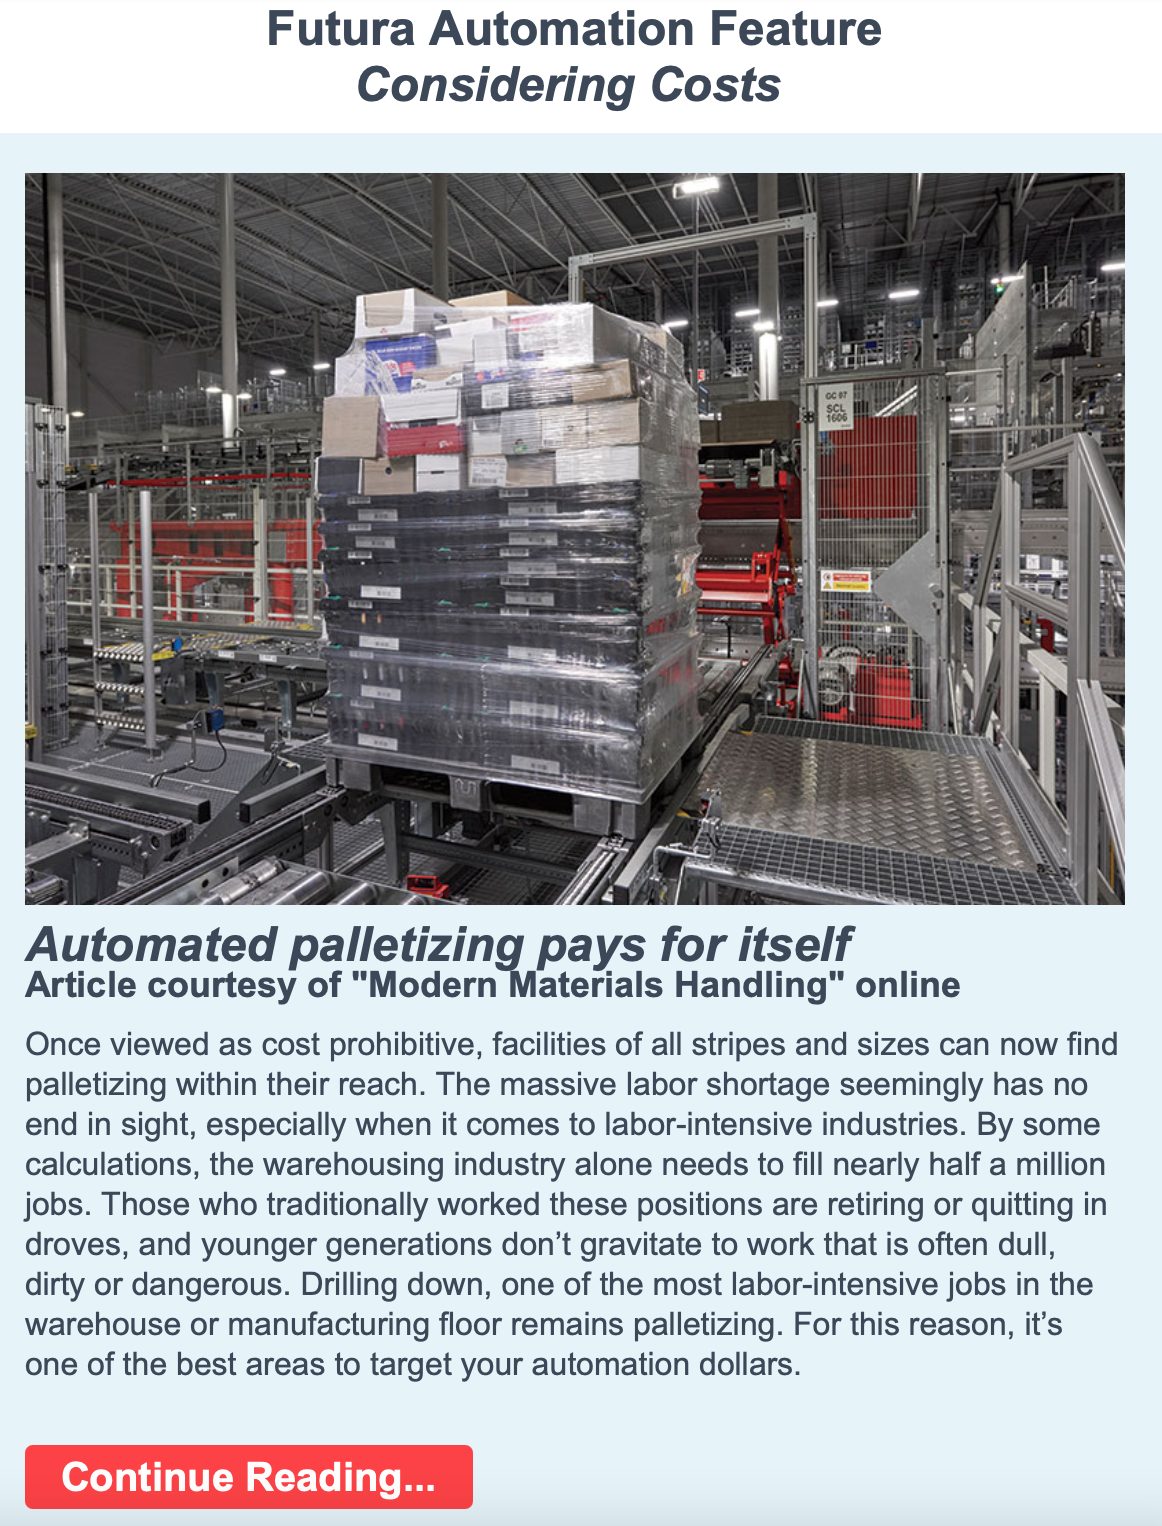 Futura Automation Considering Costs